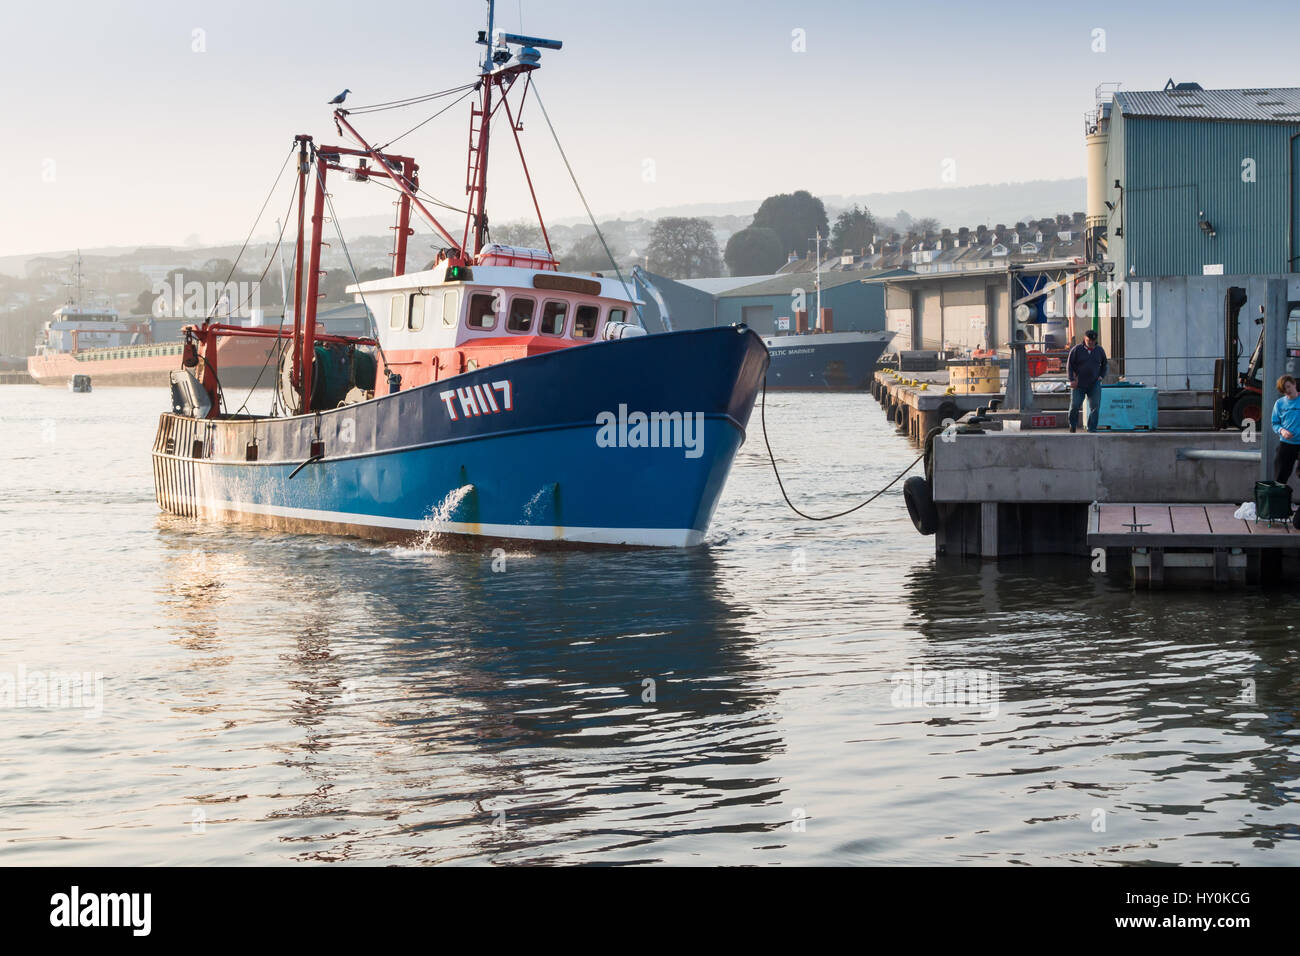 A Teignmouth trawler, docking to unload its catch of fish on the fish quay at Teignmouth, Devon, UK. Two young males are fishing on a pontoon also. Stock Photo